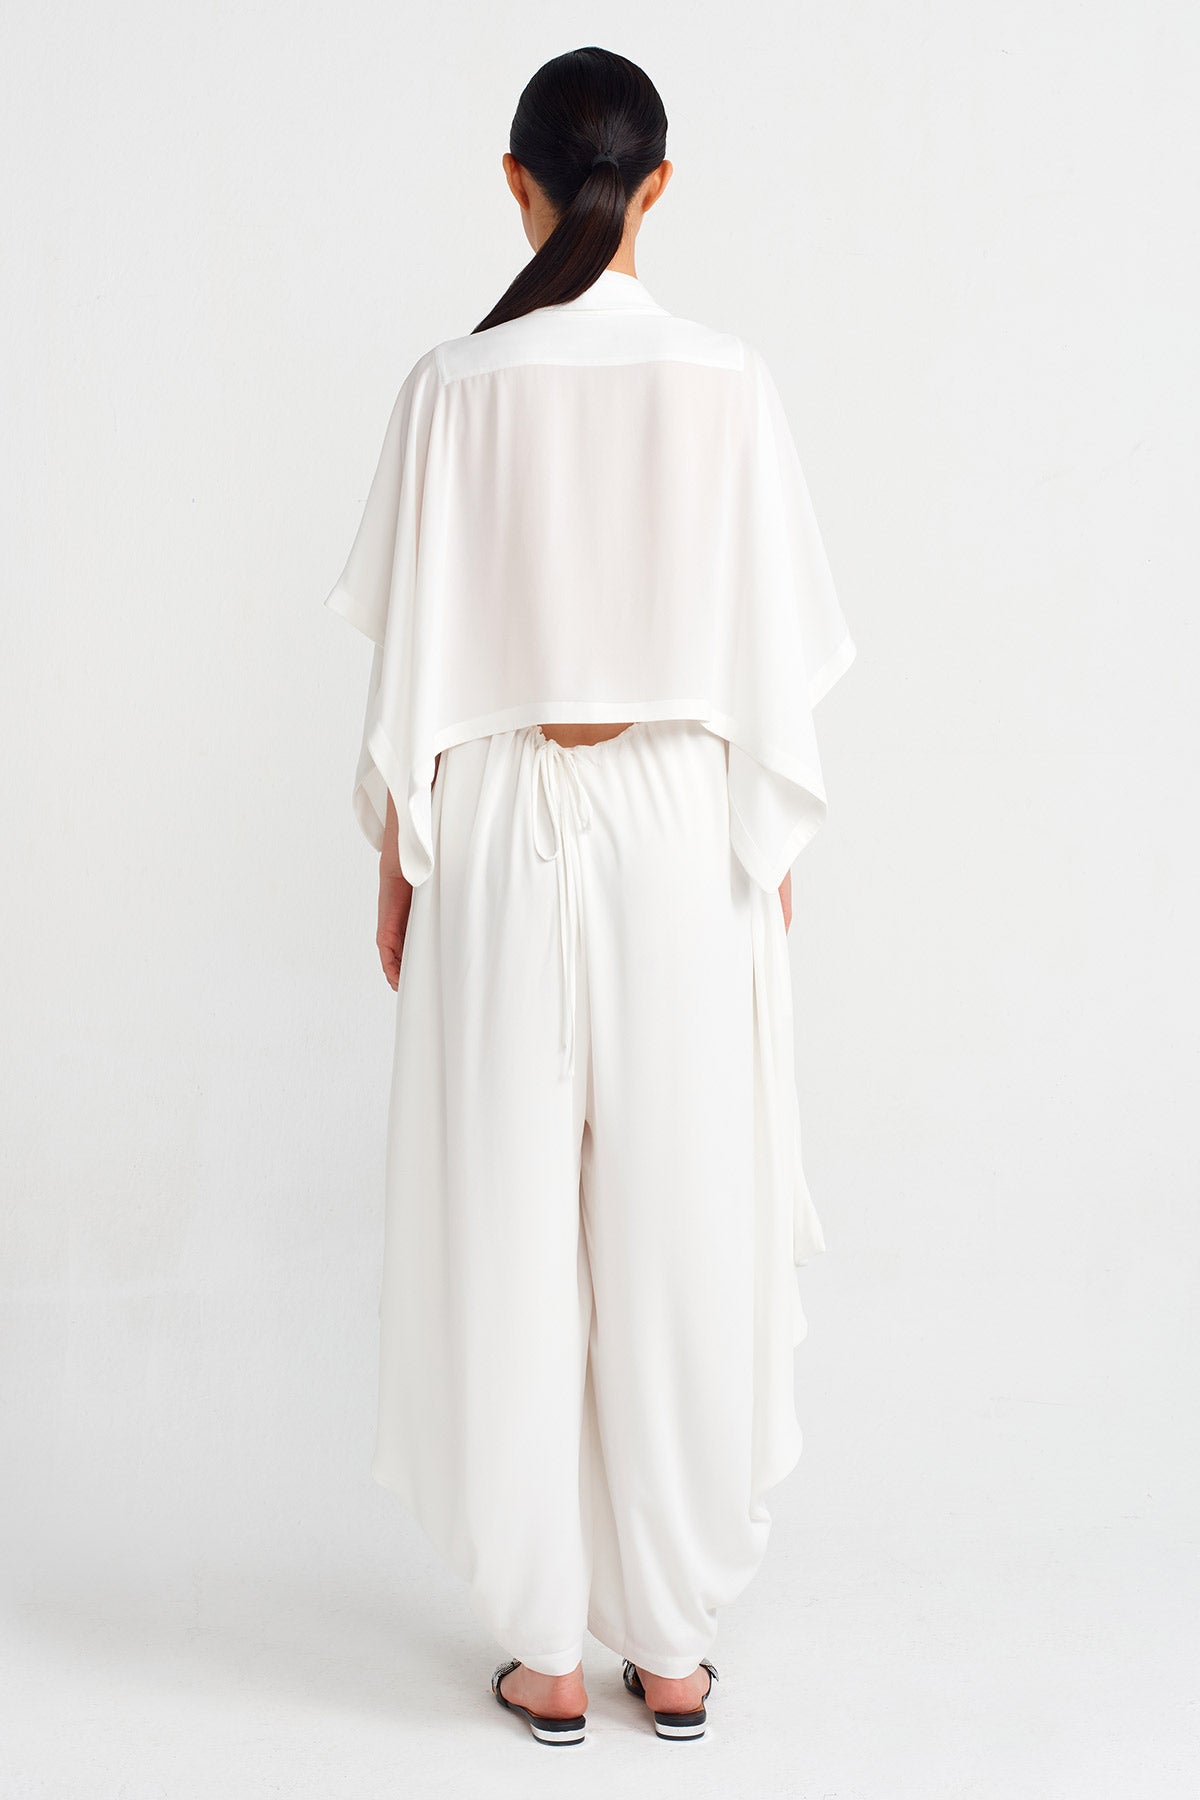 Off White Backless Cape Dress-Y244014140